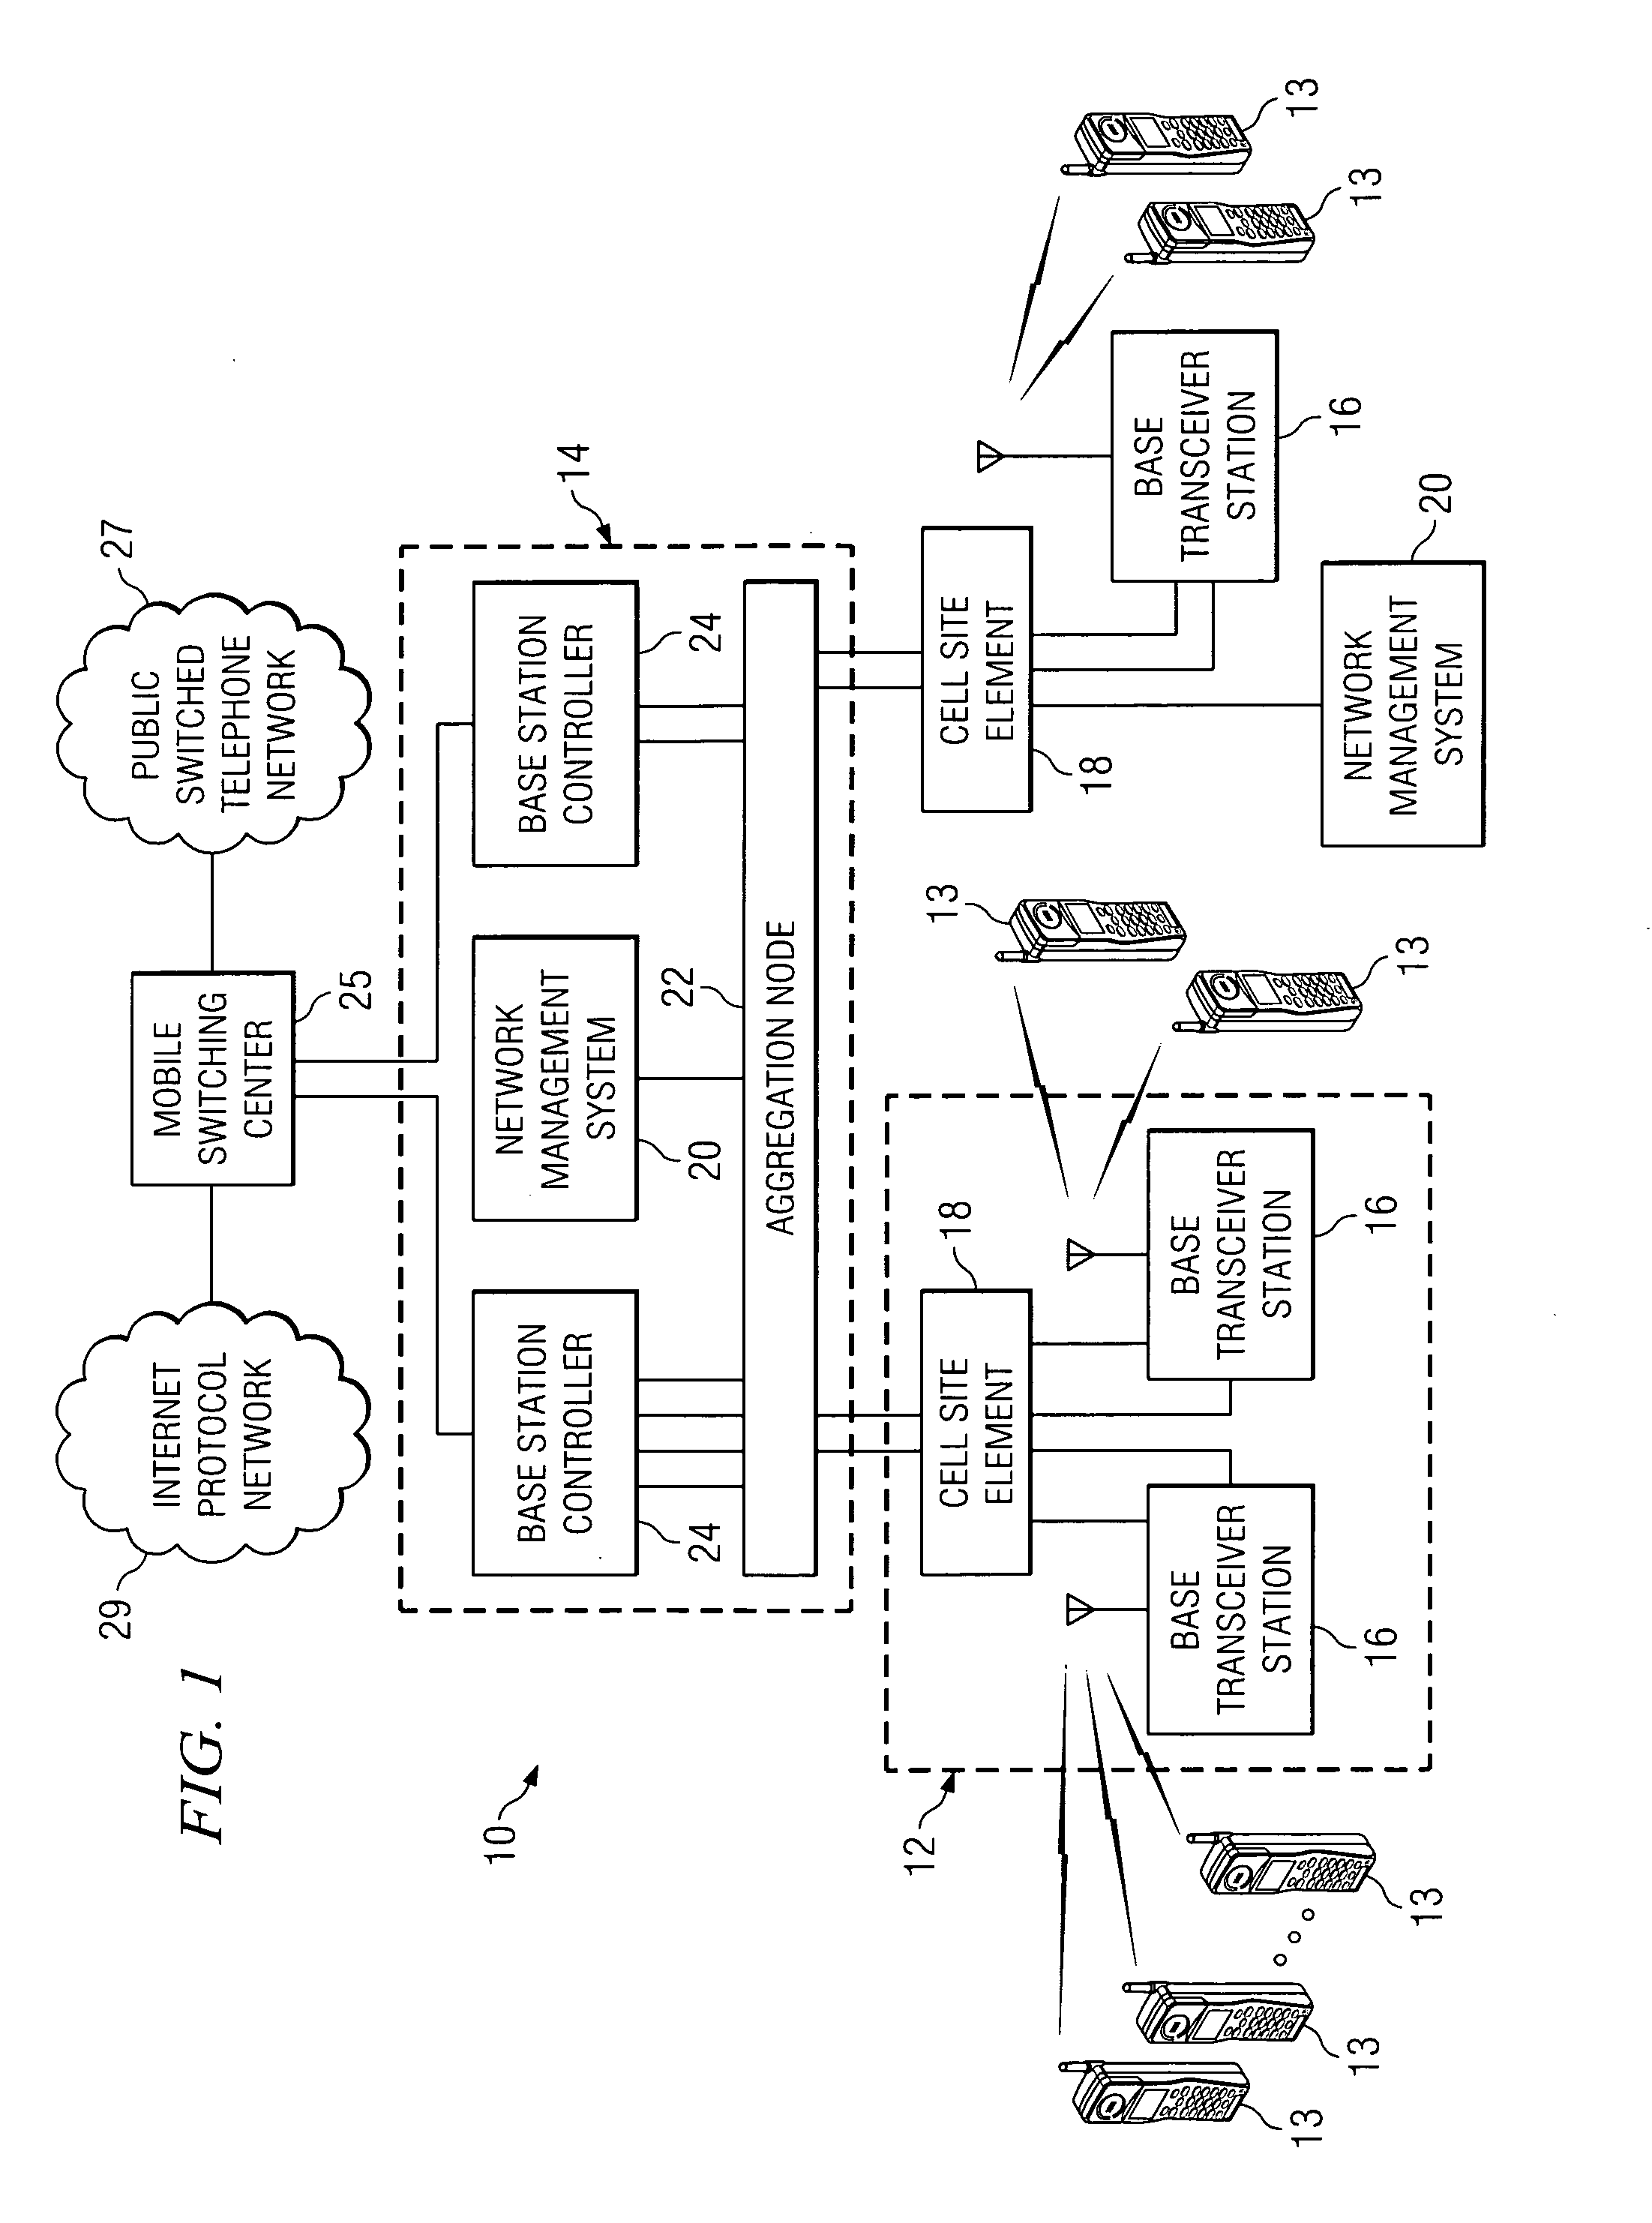 System and method for implementing a preemptive retransmit for error recovery in a communications environment